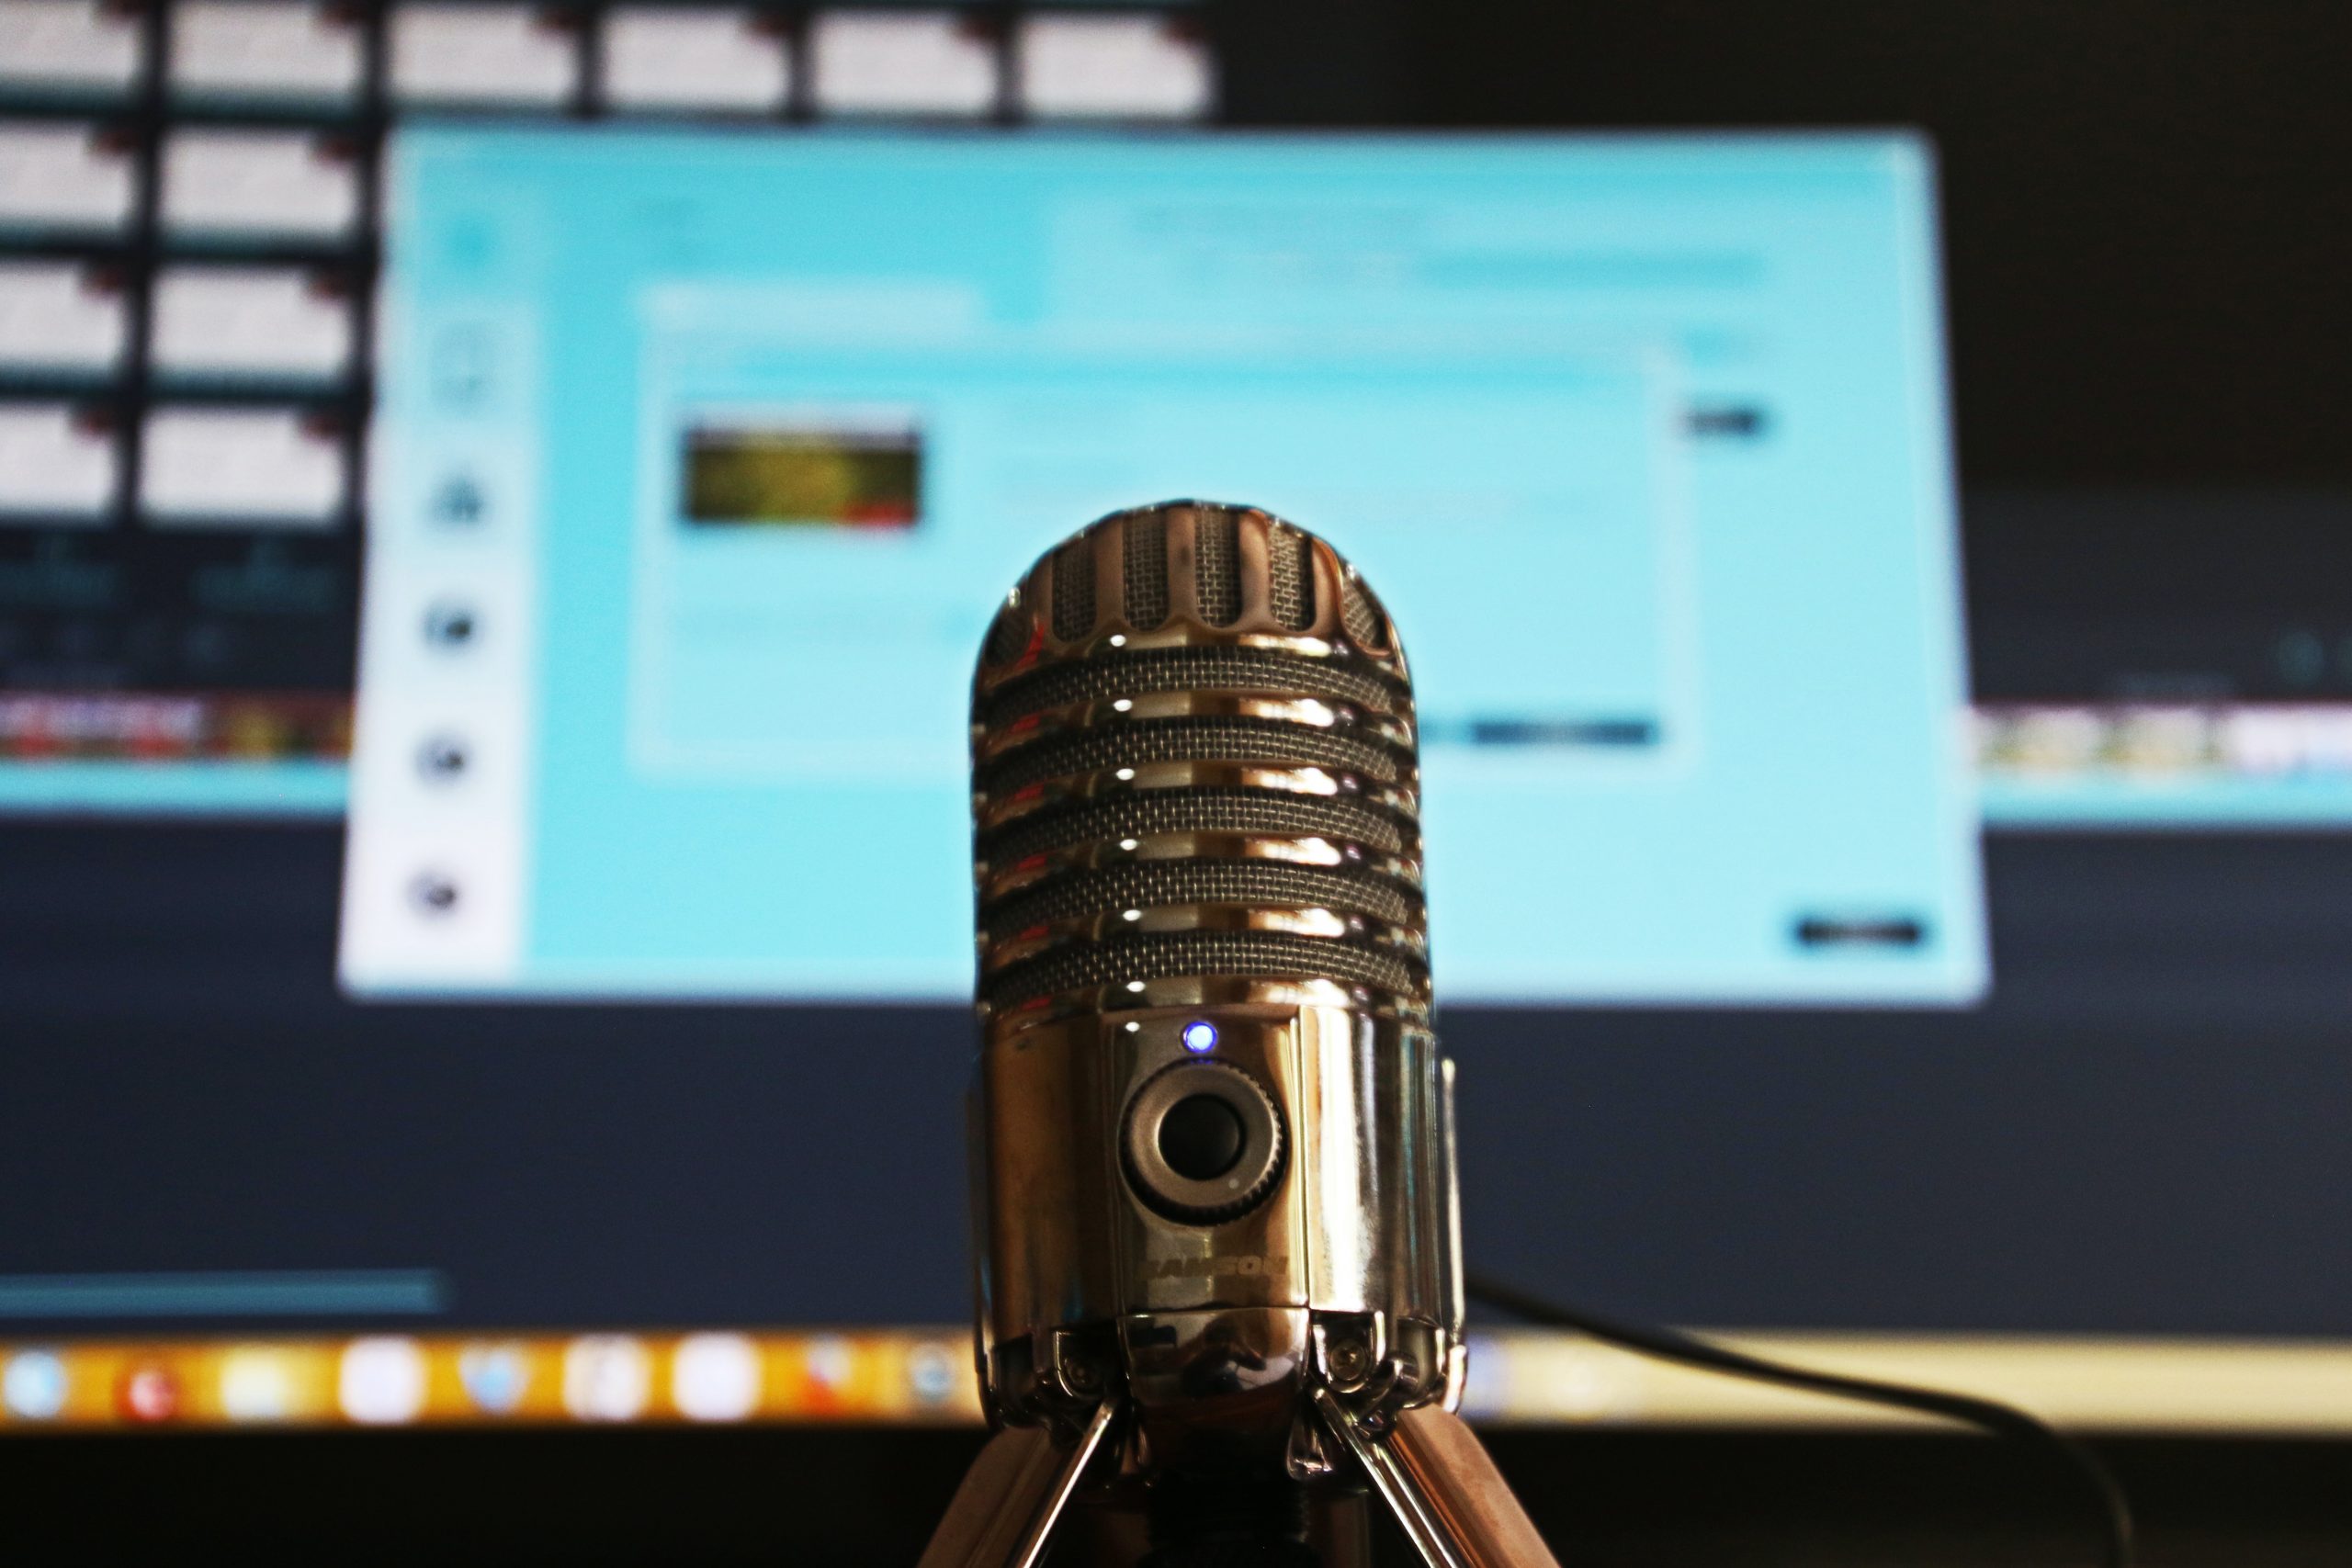 Big podcast-style audio microphone sits in front of a computer screen.